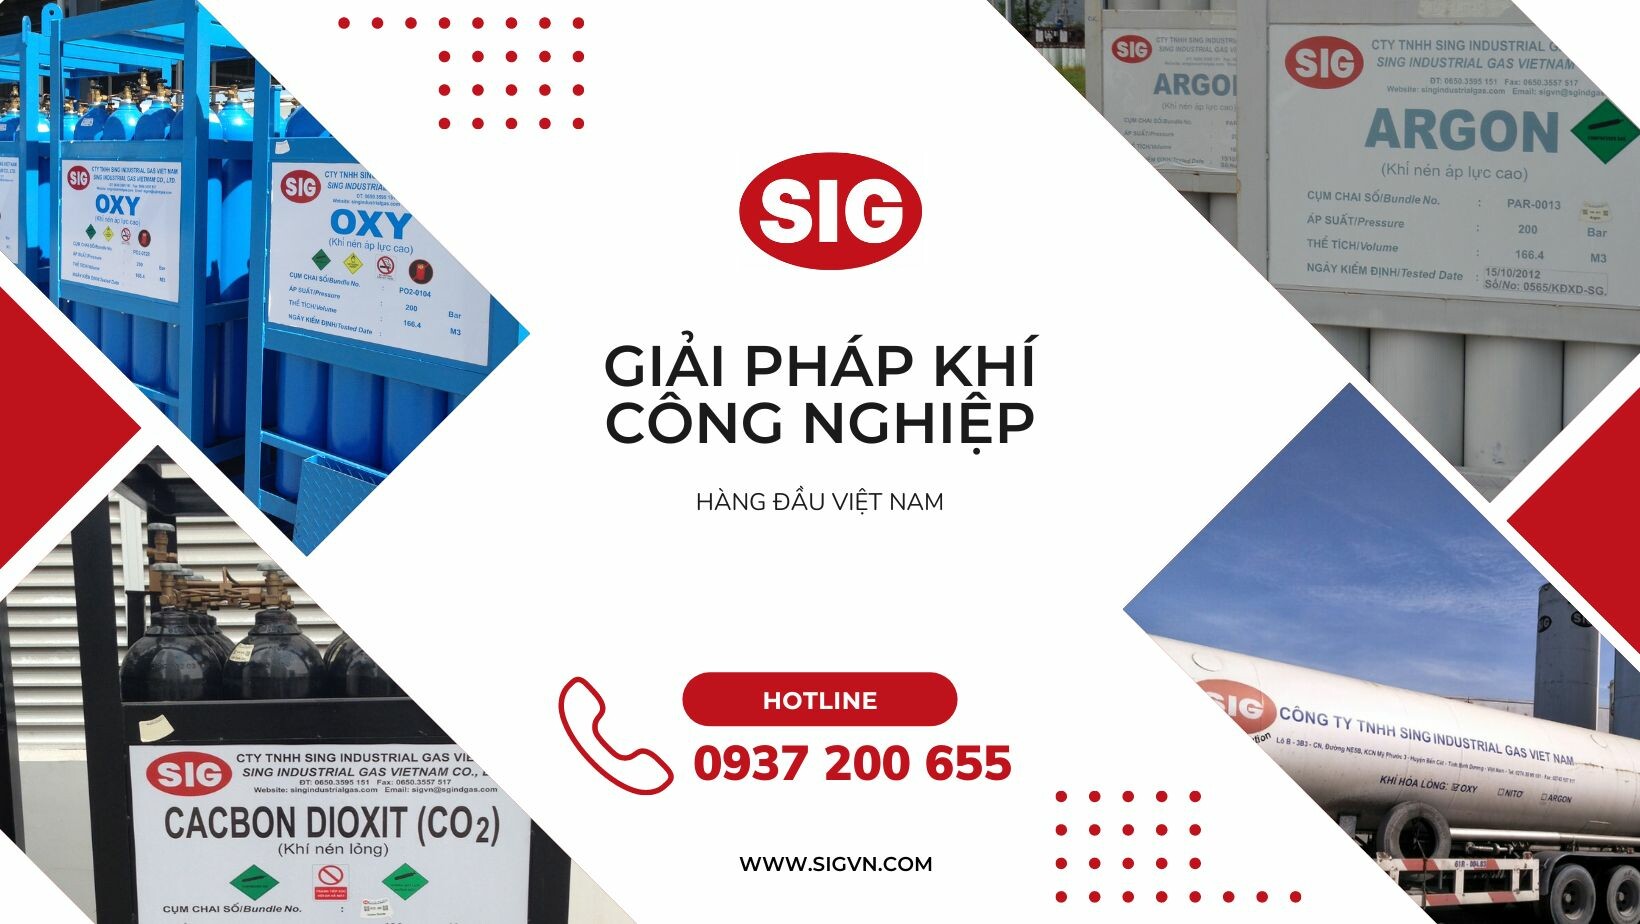 Cover image for Sing Industrial Gas Vietnam Co.,Ltd